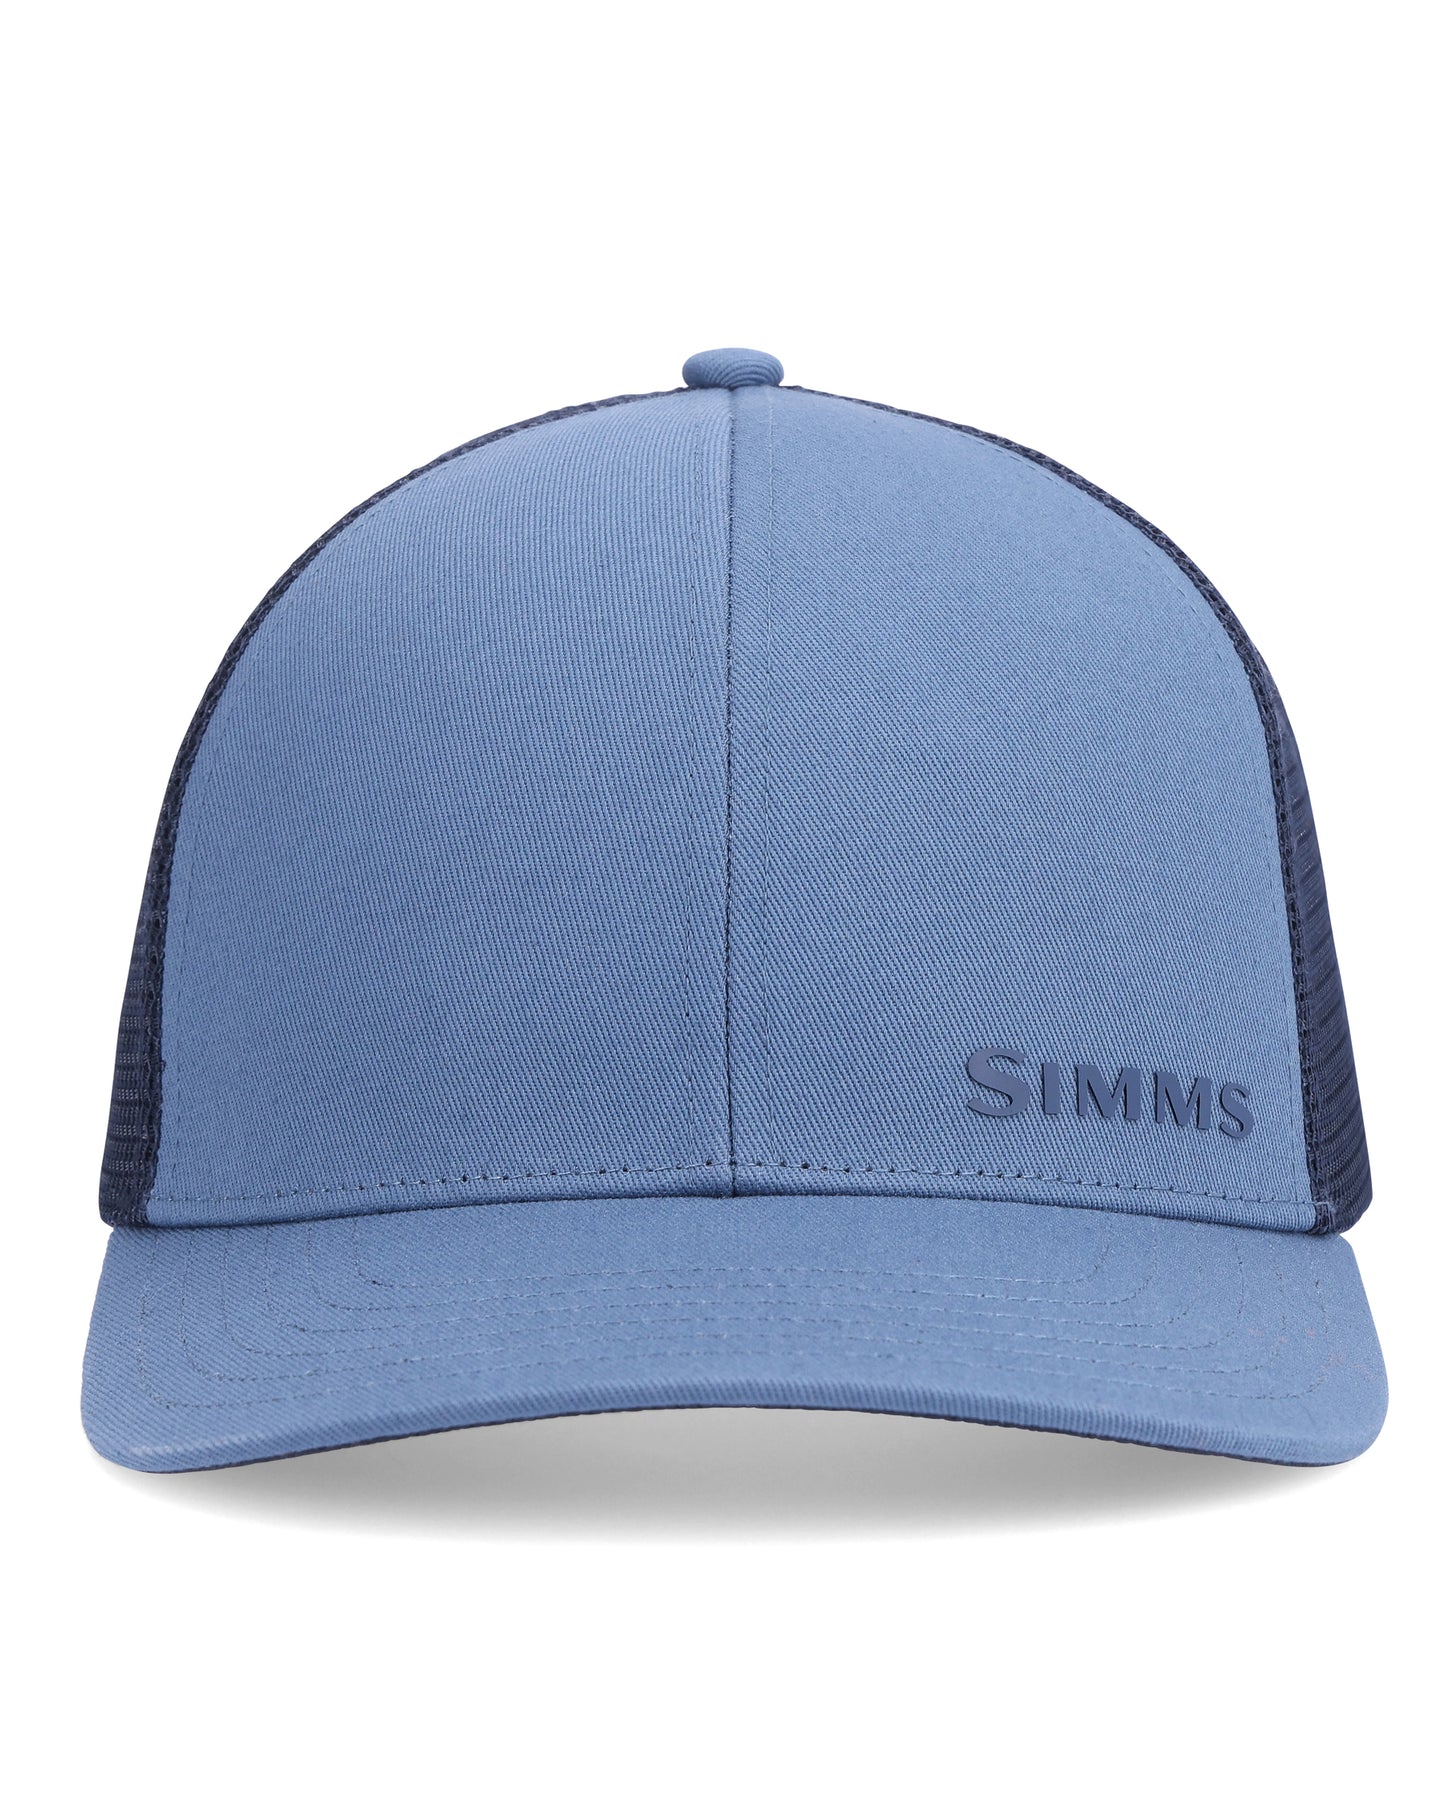 13447-1043-simms-id-trucker-tabletop-s23-front